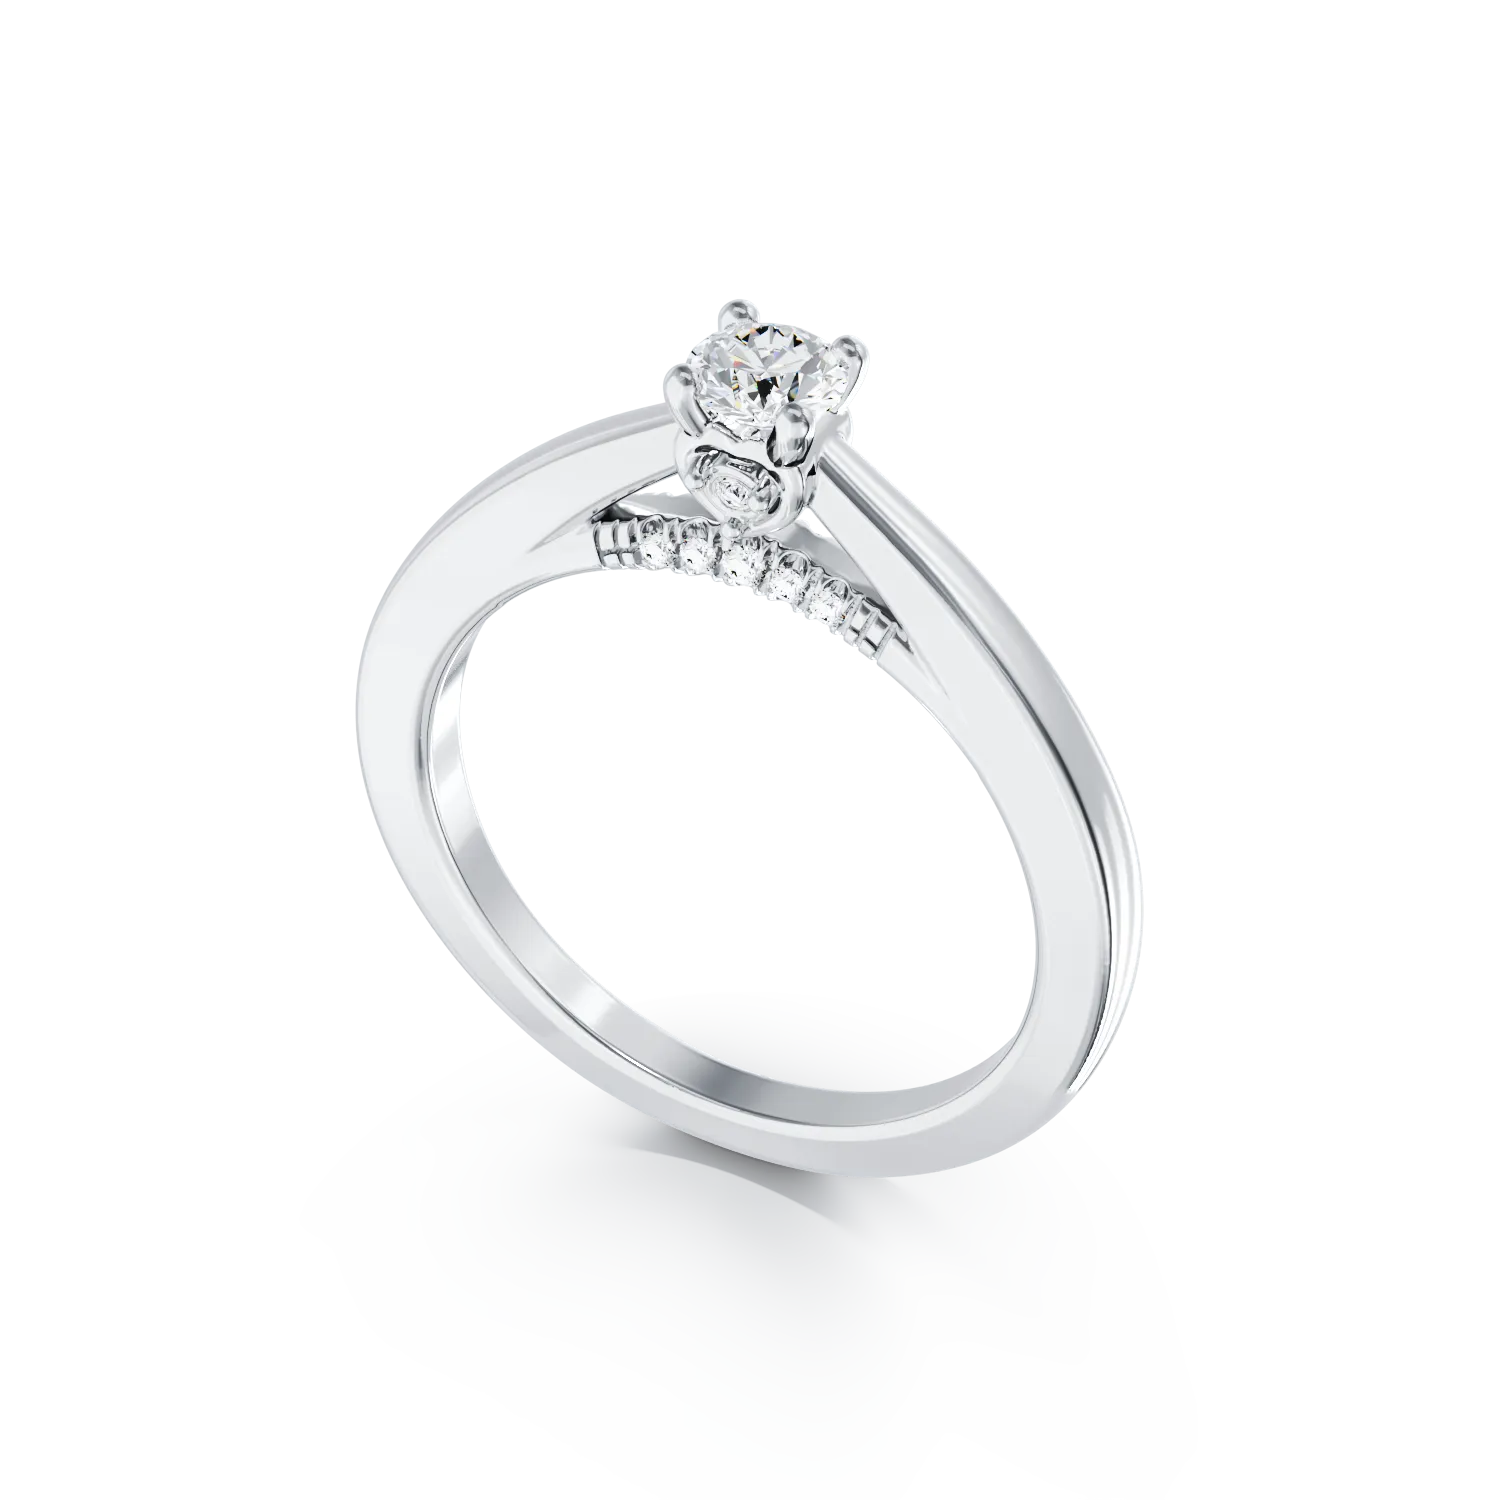 White gold engagement ring with 0.07ct diamond and 0.1ct diamonds